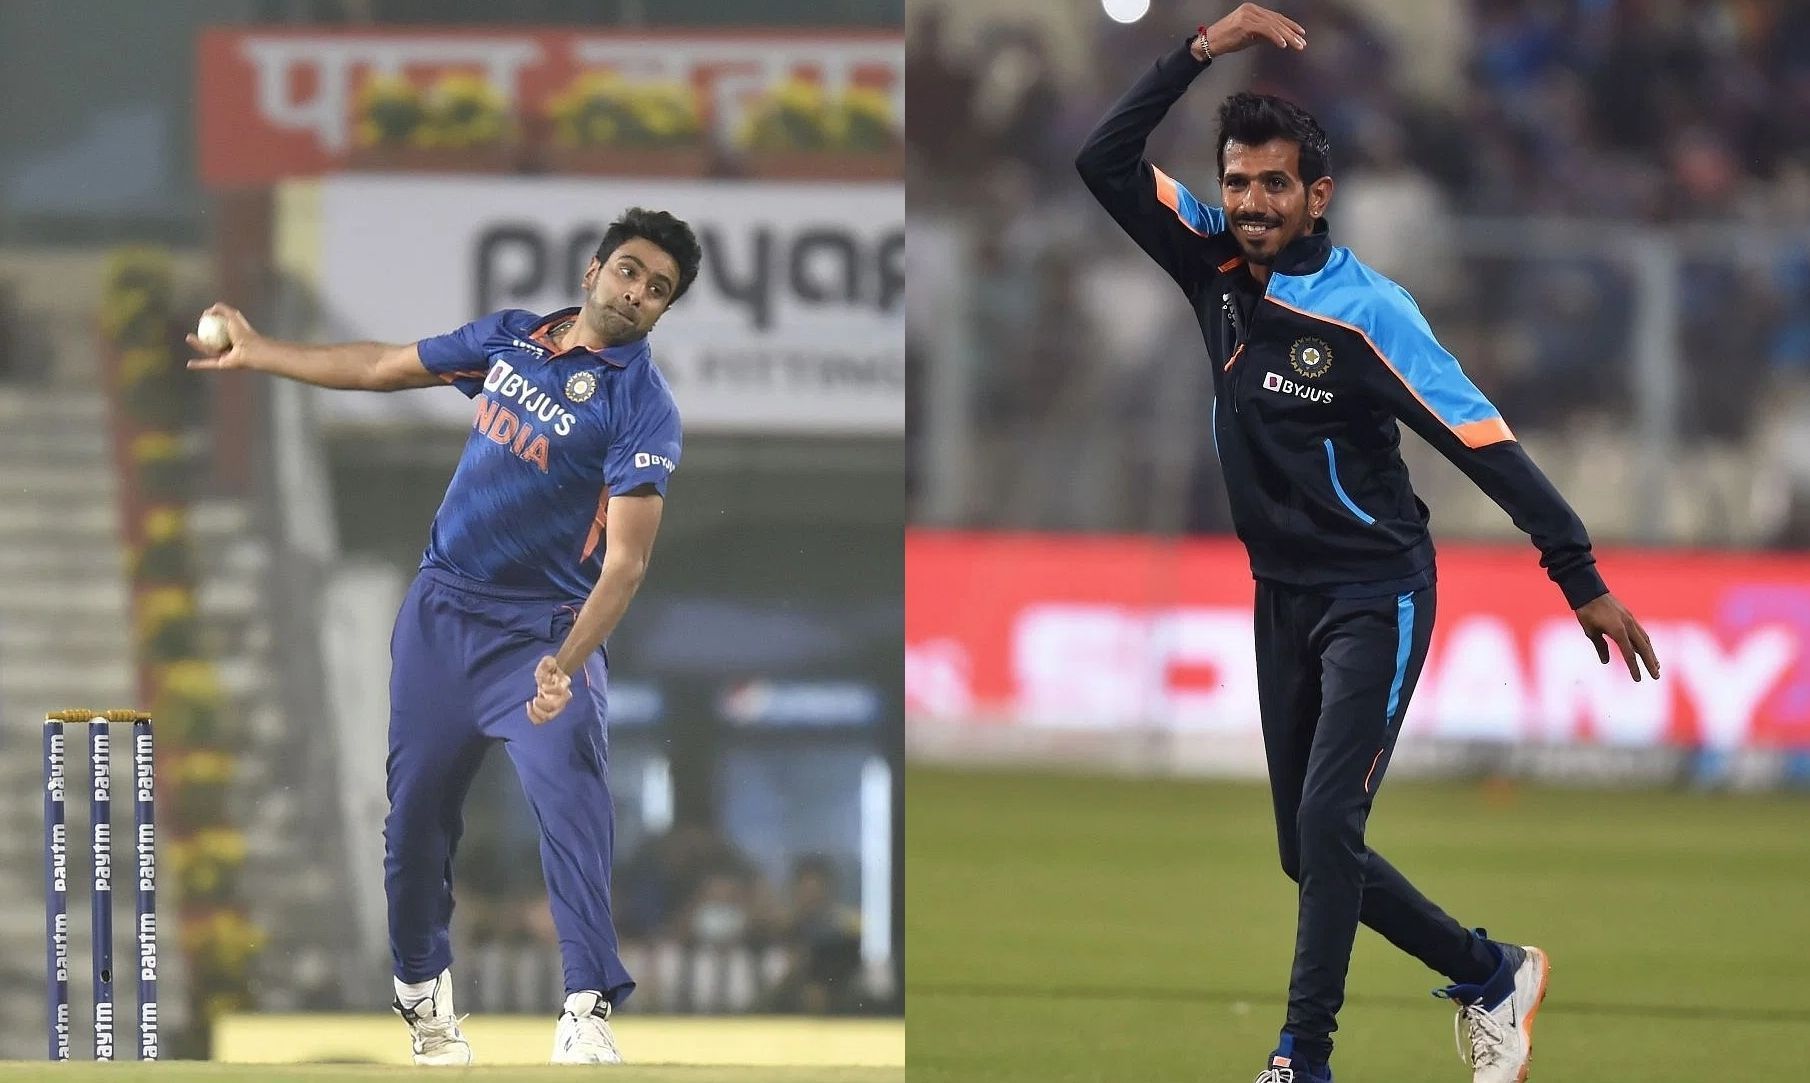 The Rajasthan Royals have a potent spin-bowling pair this year